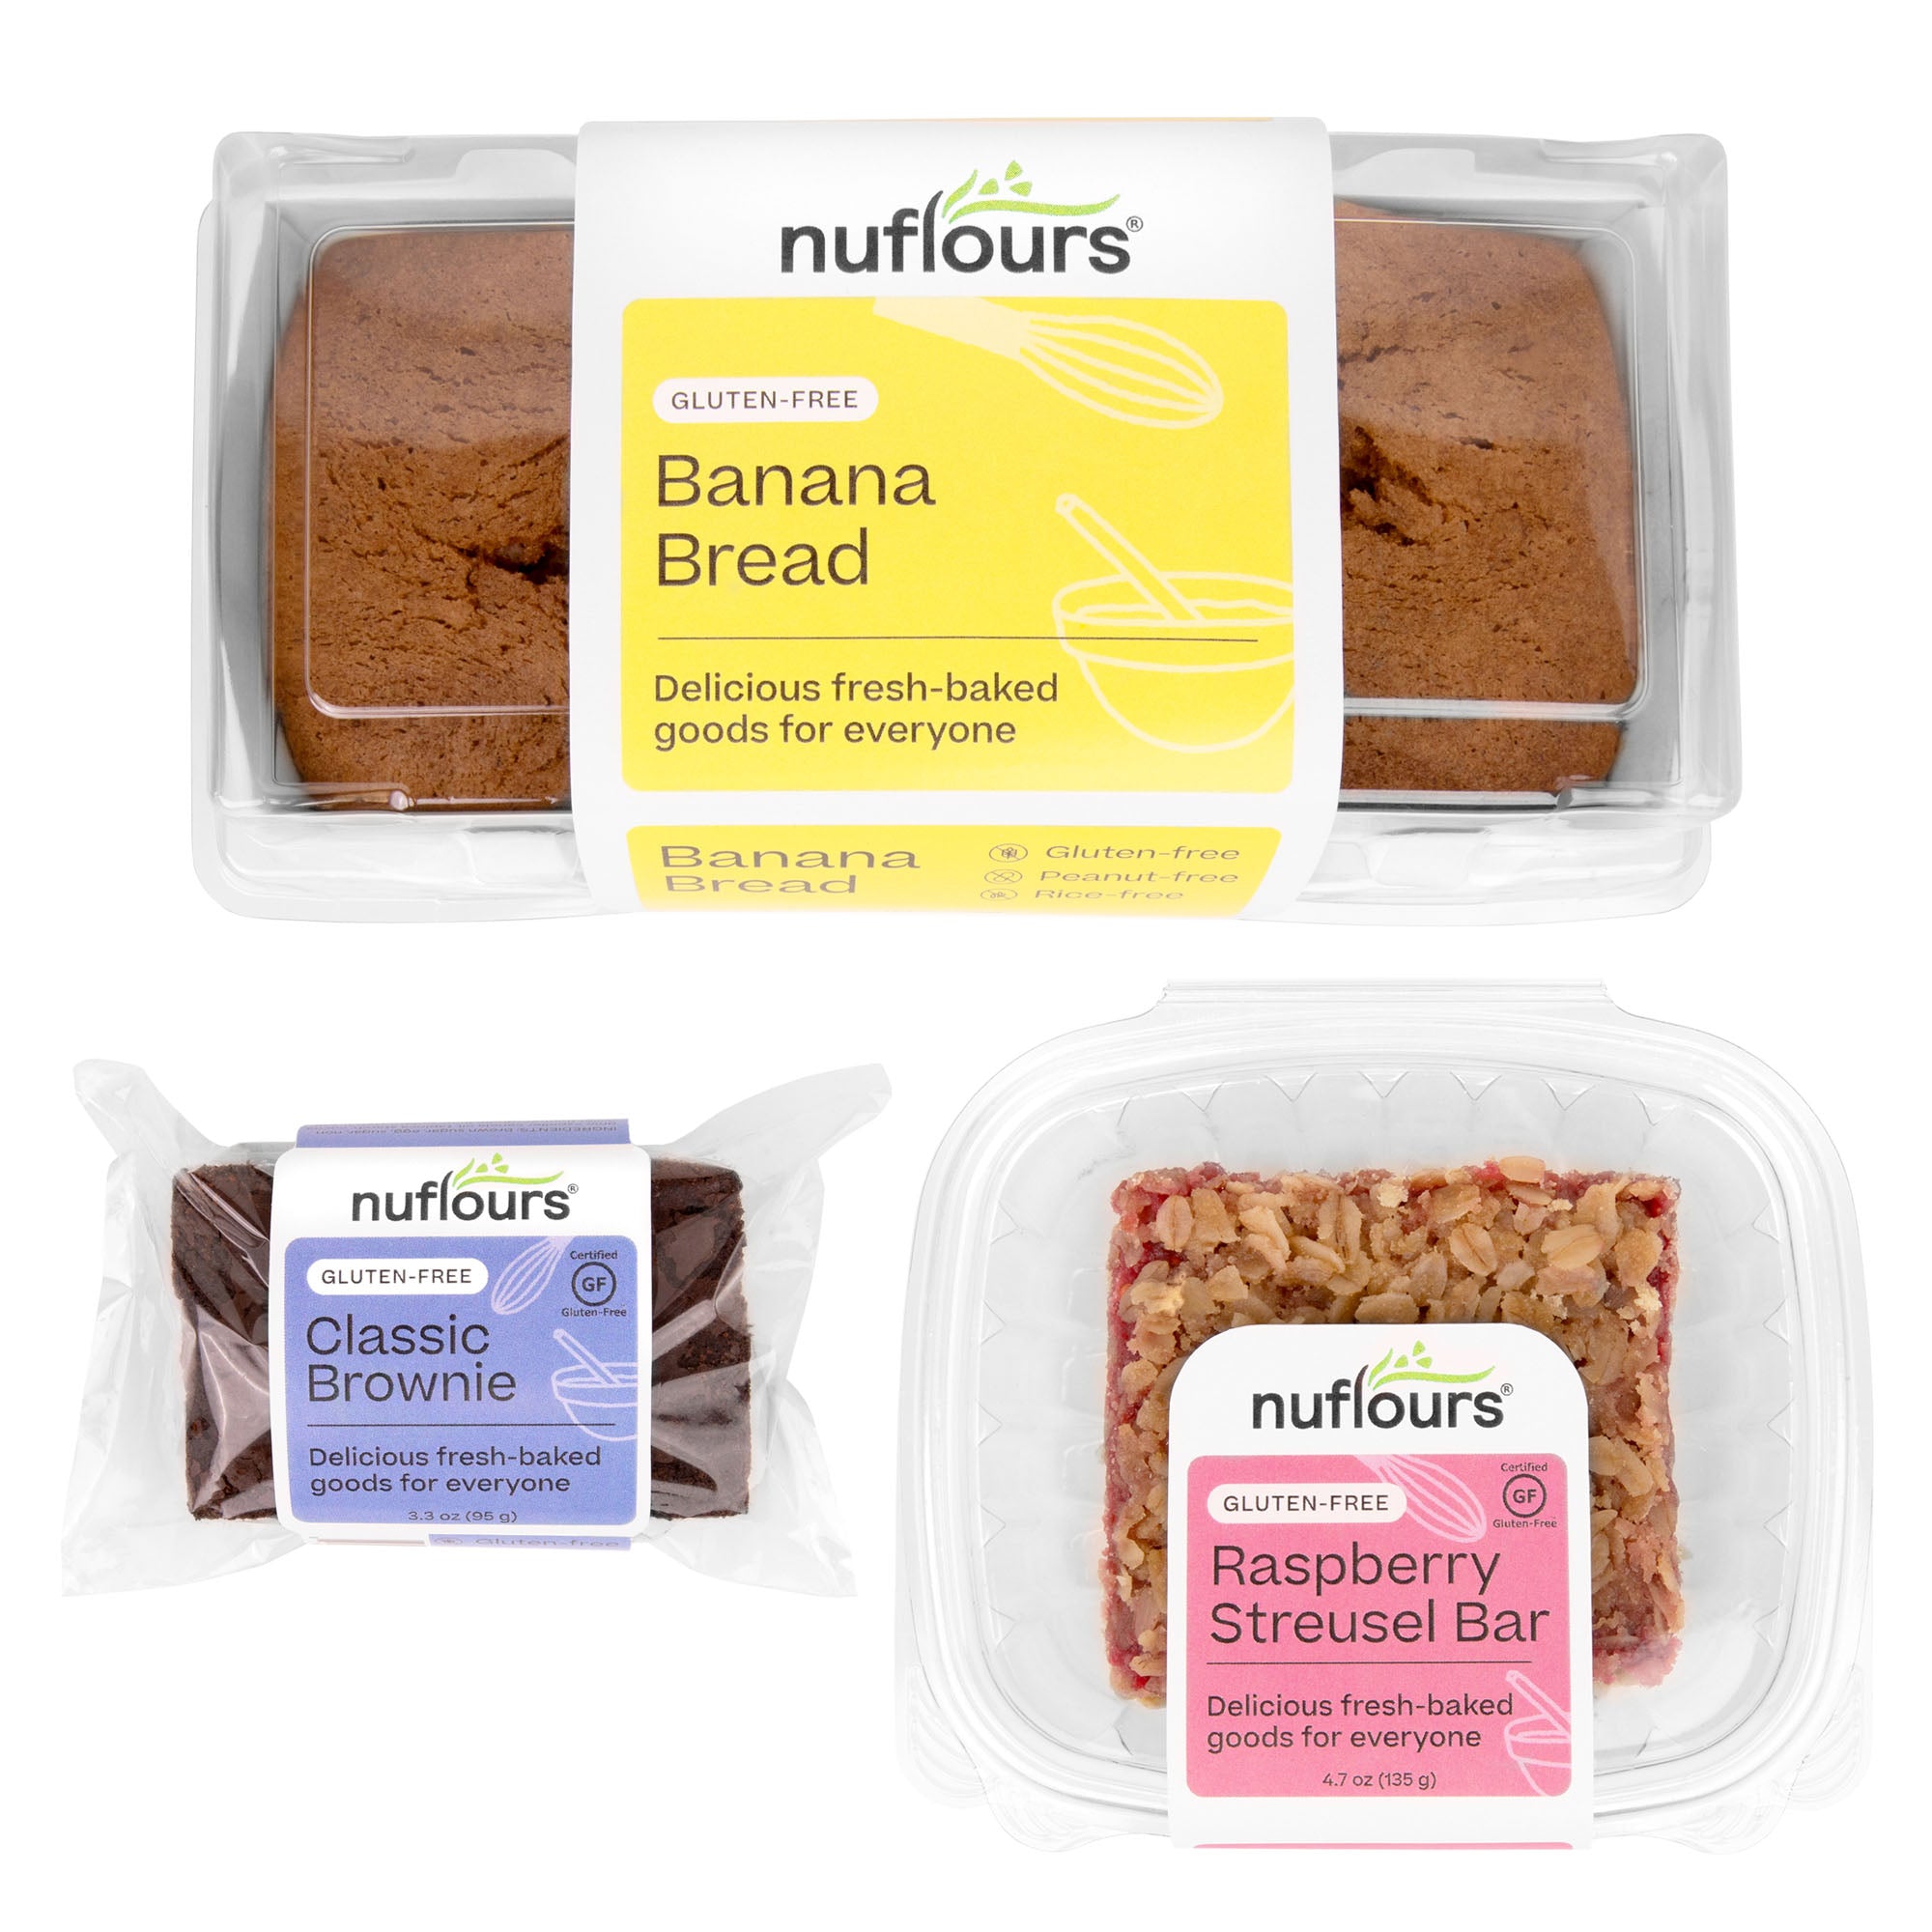 Nuflours - Gluten-free Goodness Baked
Fresh For You